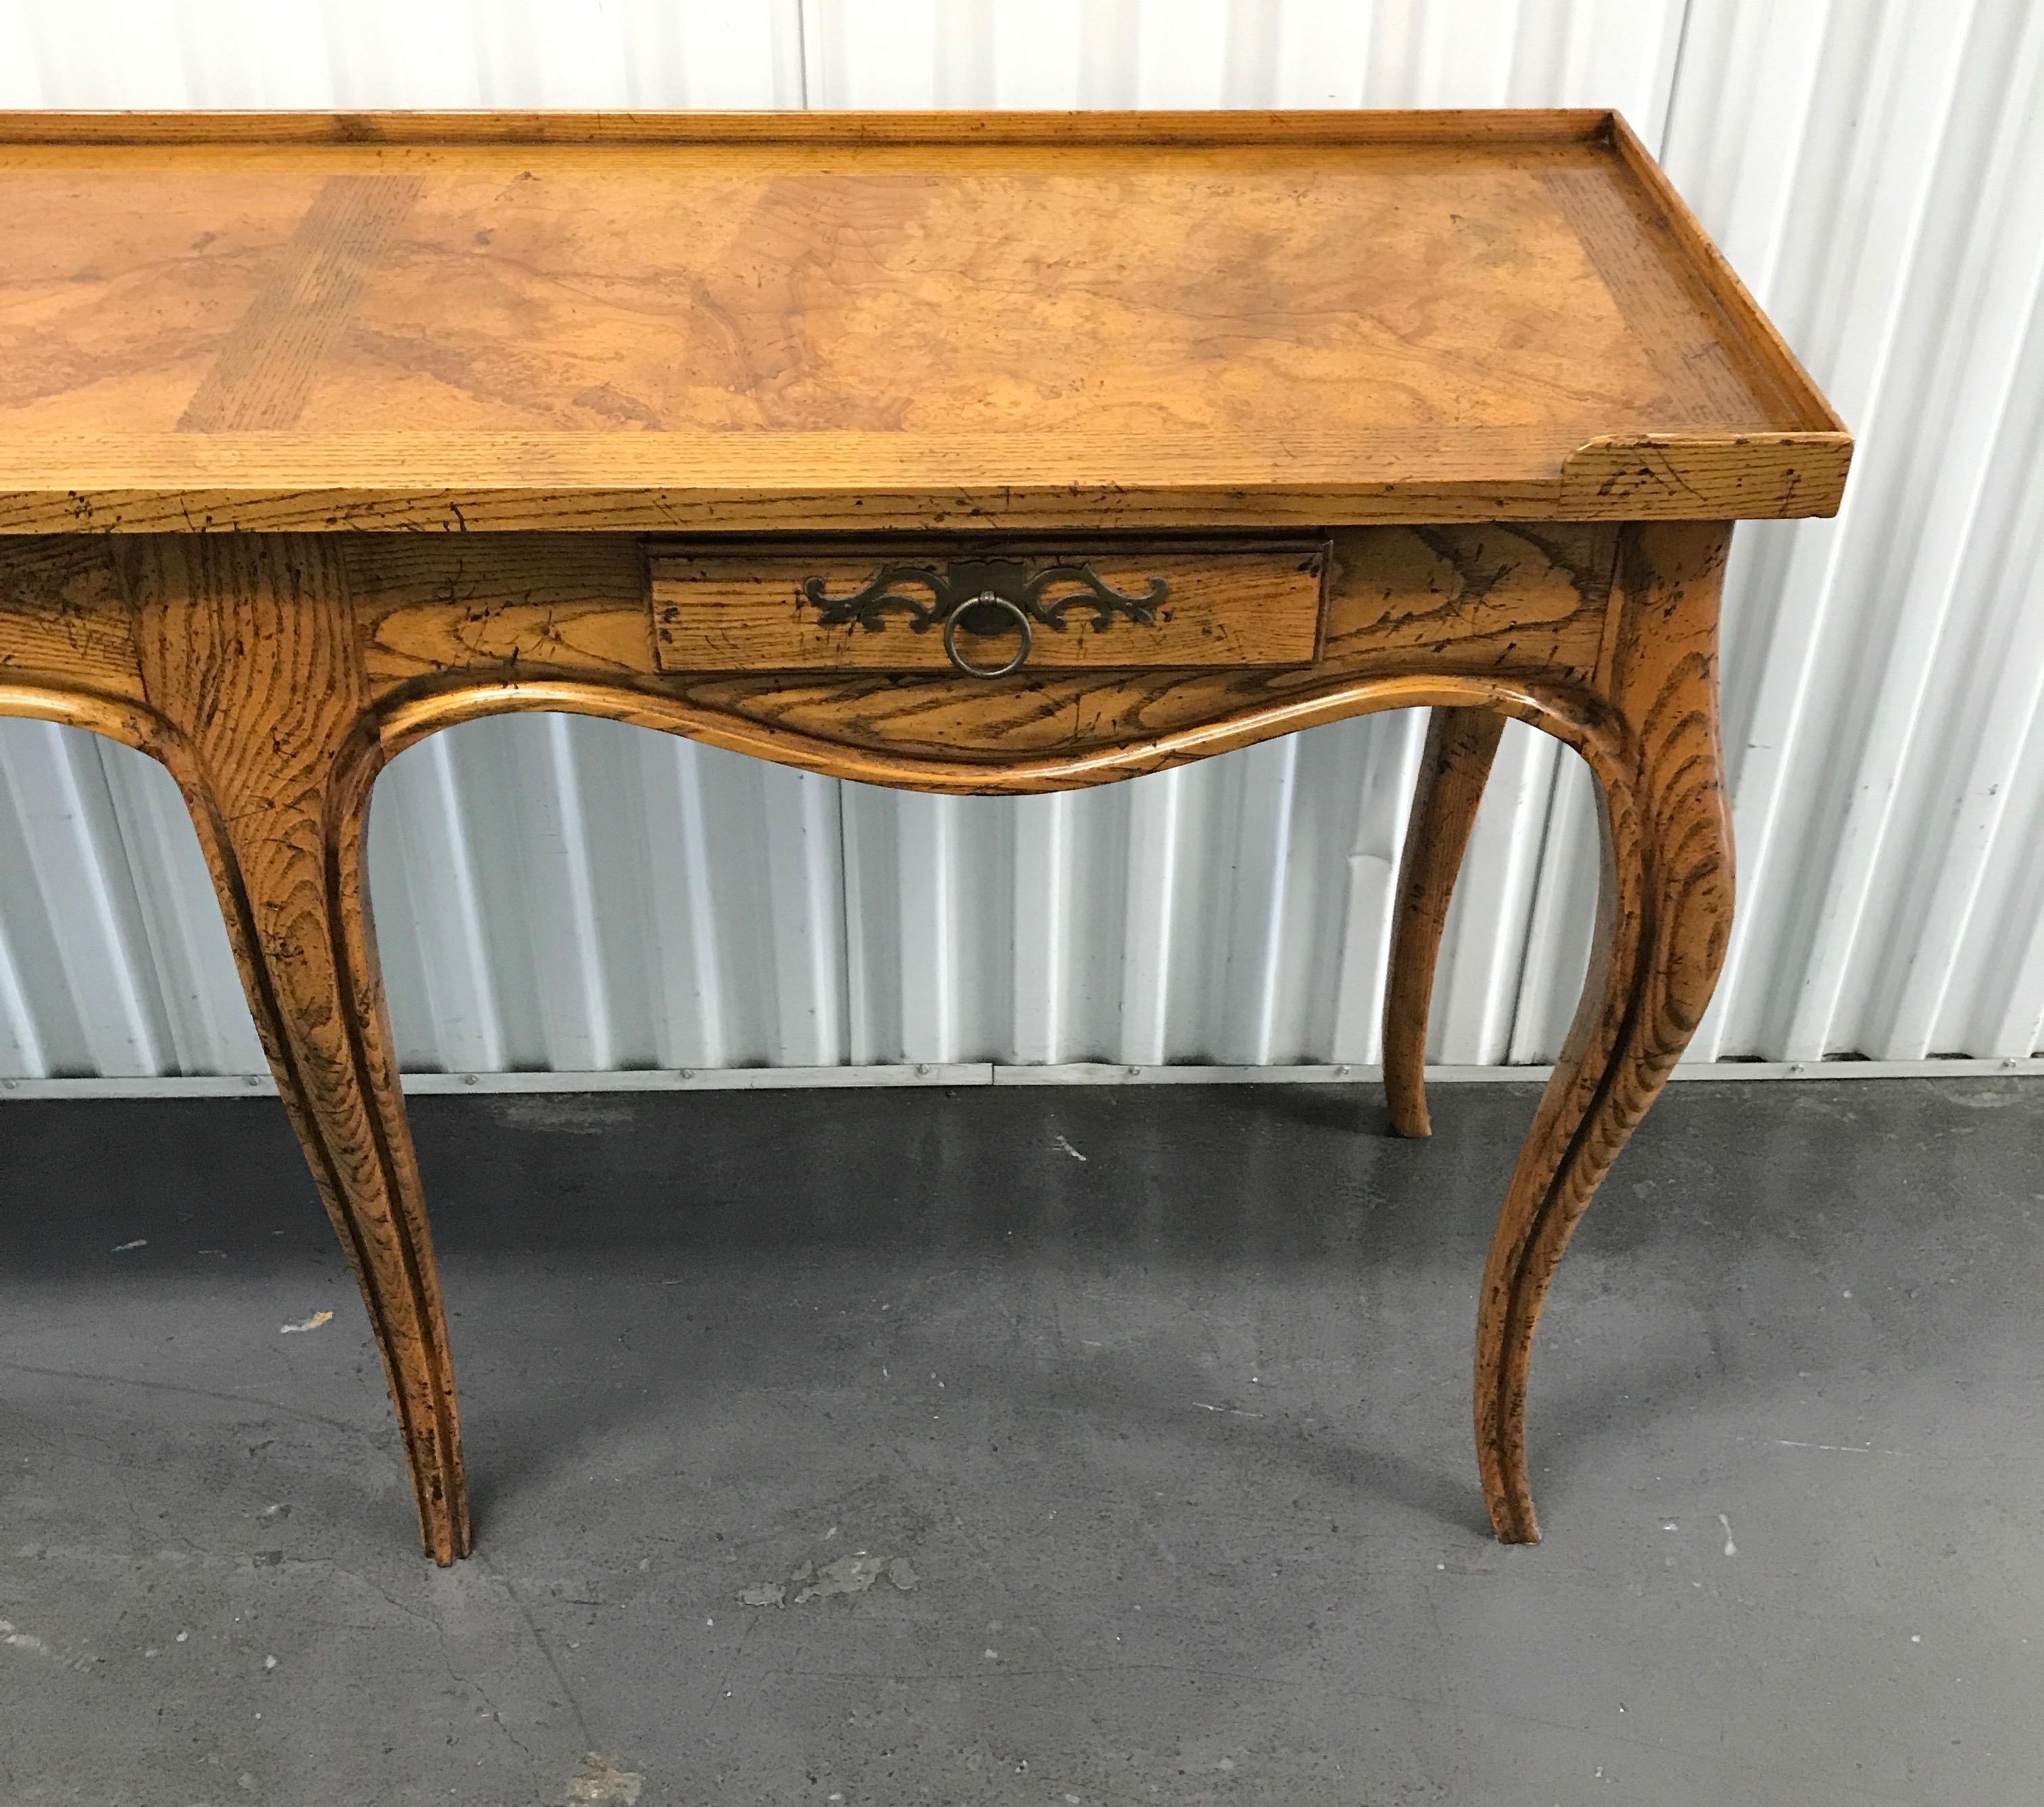 Burlwood and oak cabriolet leg console table with two drawers by Milling road collection for Baker.